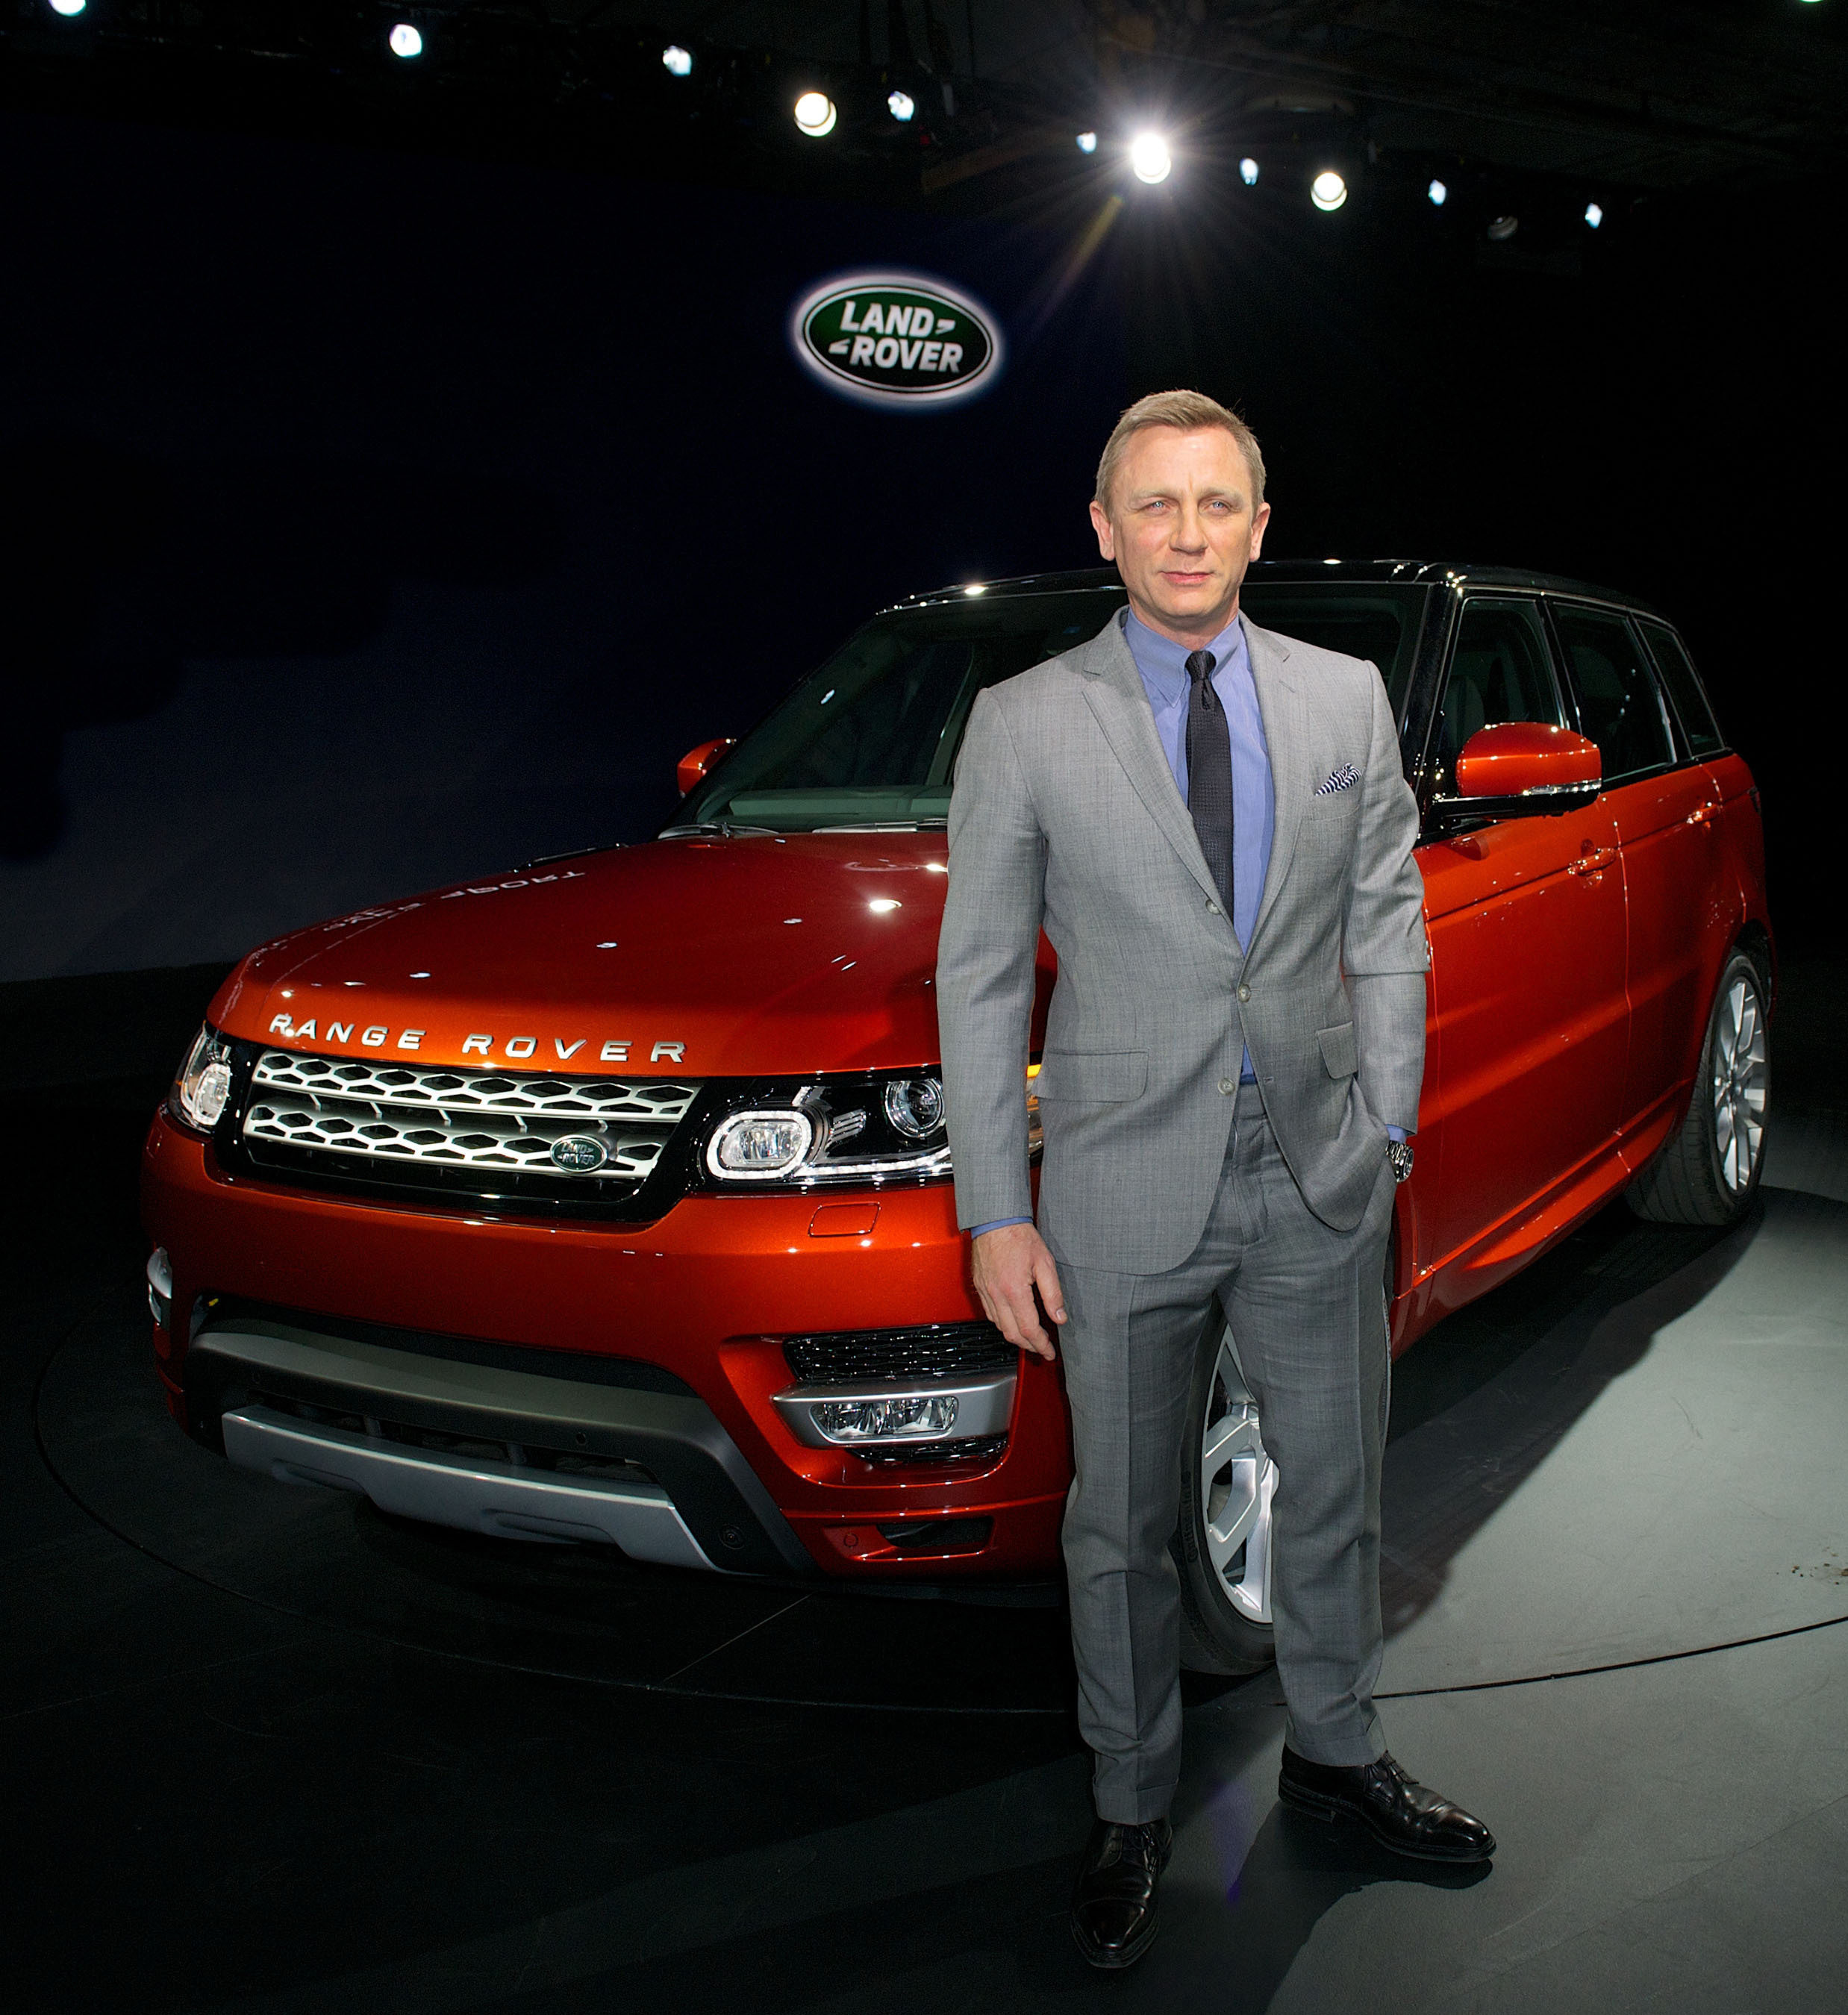 Daniel Craig unveils the All-New Range Rover Sport with a live drive through the streets of New York. (PRNewsFoto/Land Rover) (PRNewsFoto/LAND ROVER)